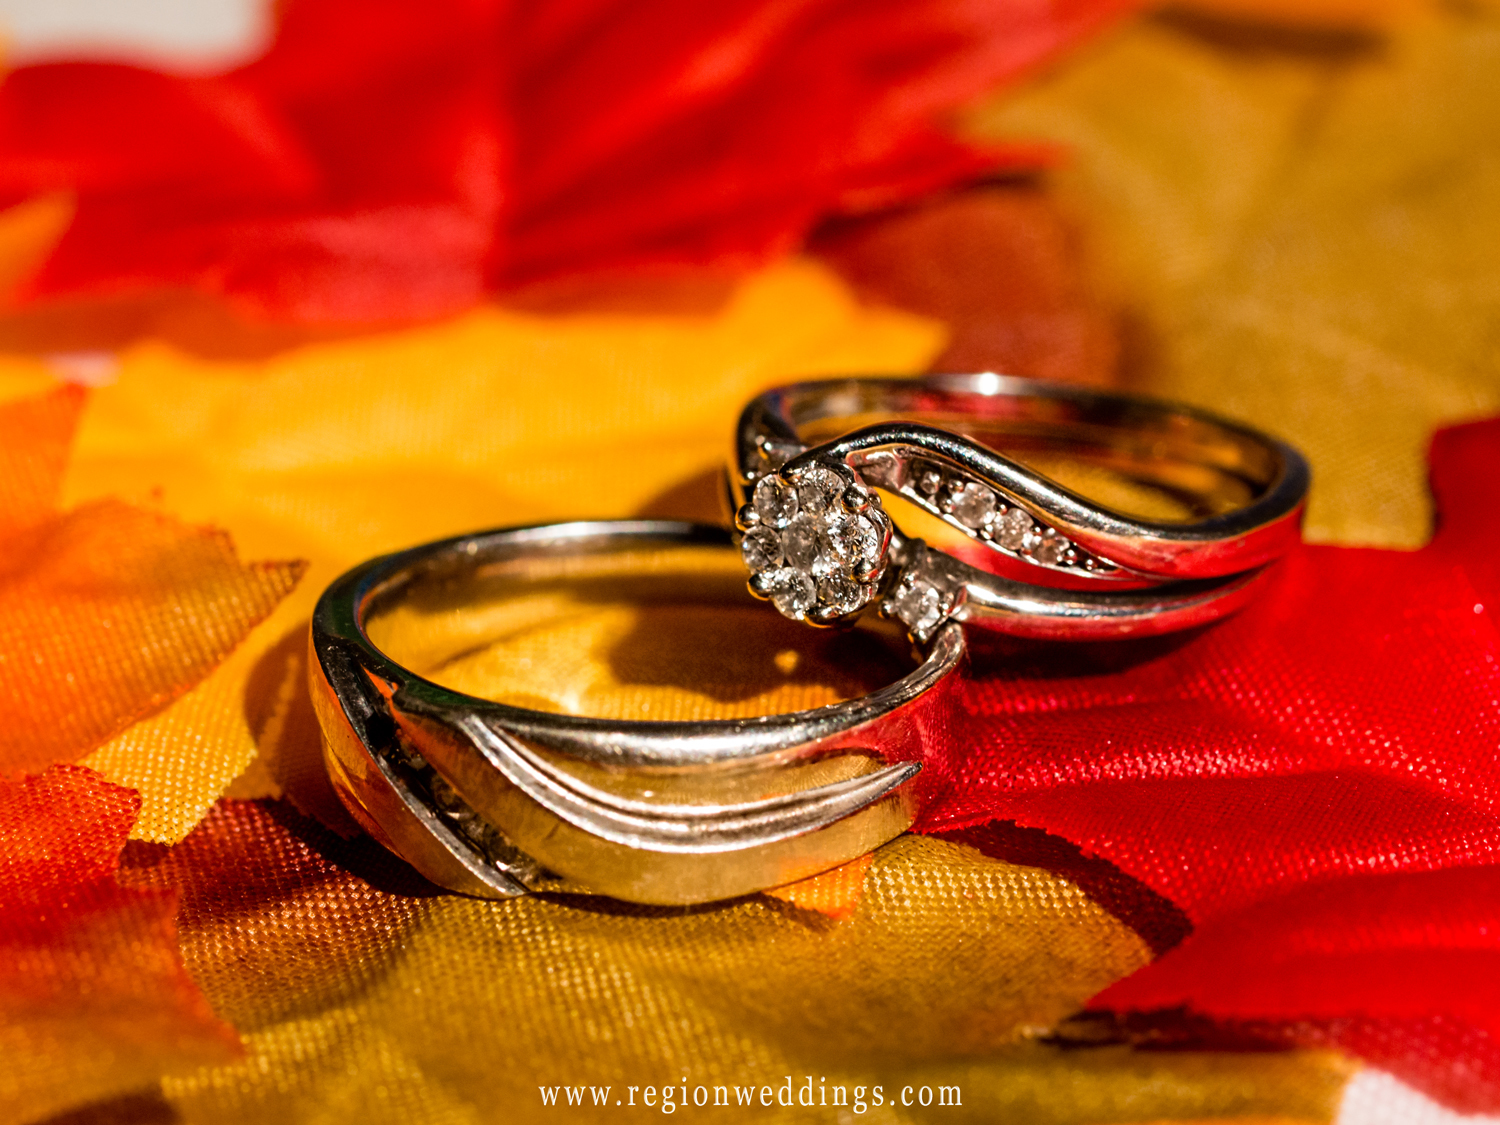 Ring Ceremony Photos, Download The BEST Free Ring Ceremony Stock Photos &  HD Images